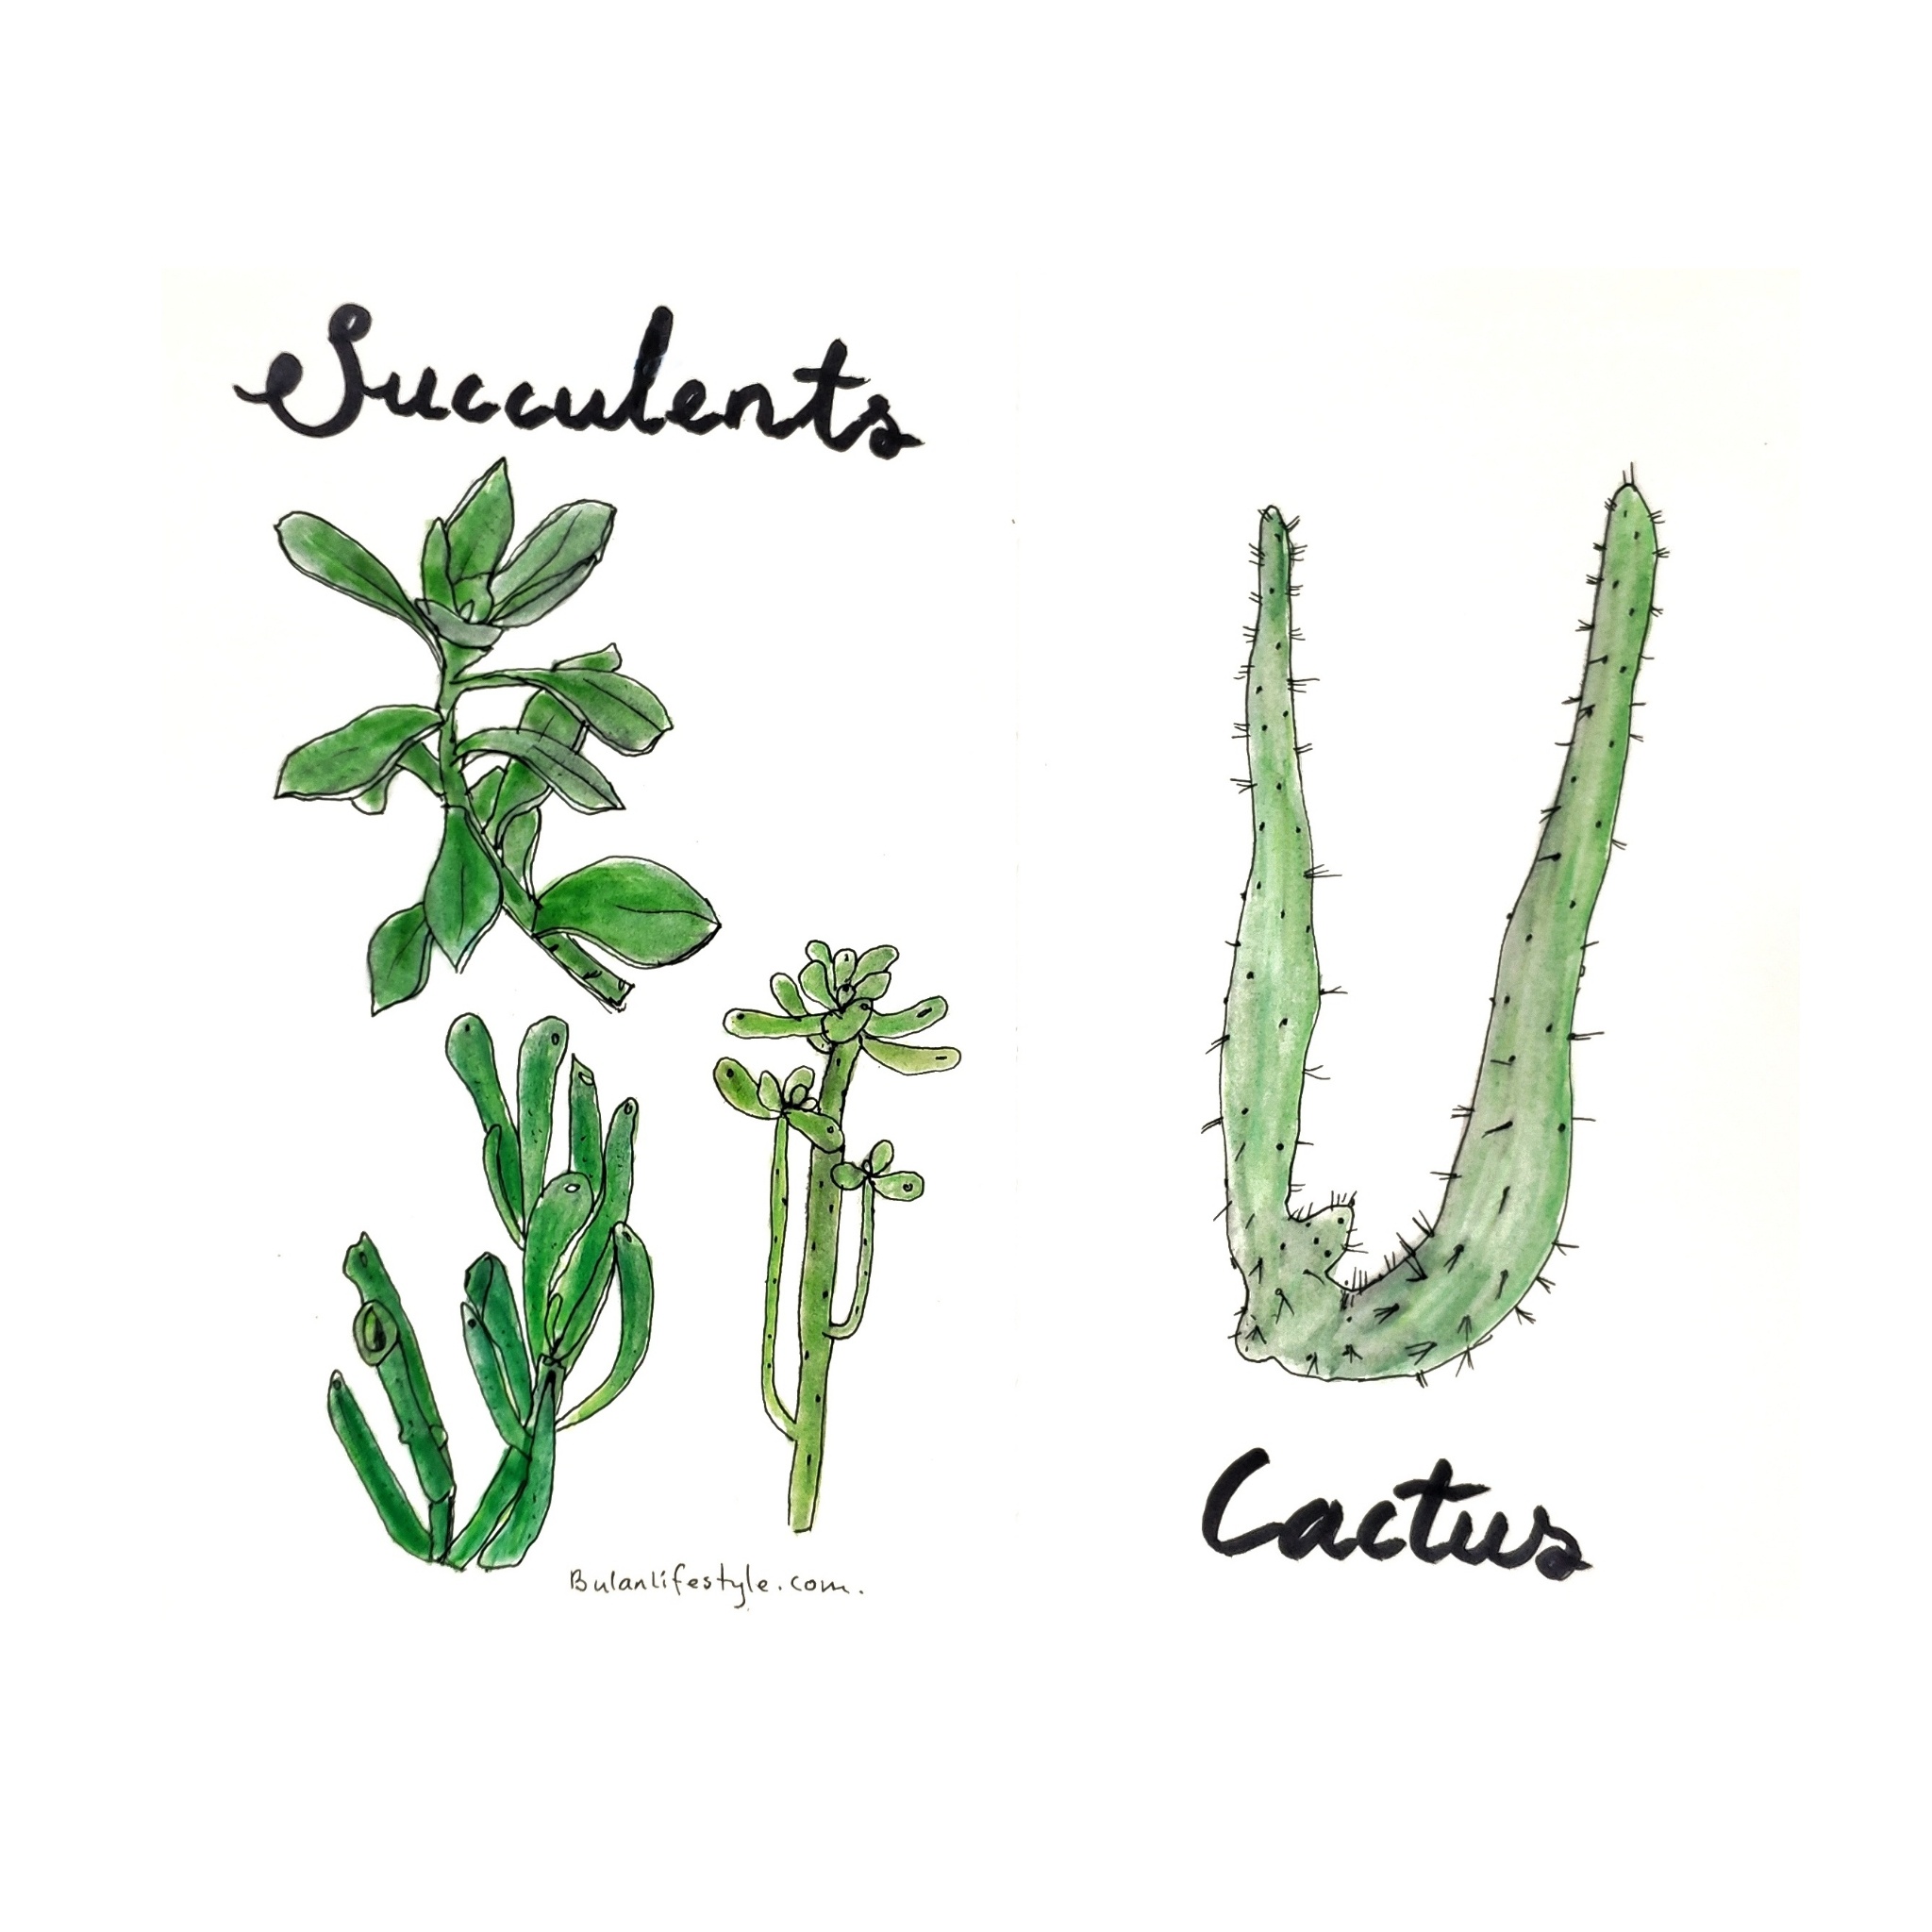 Succulents and cactus